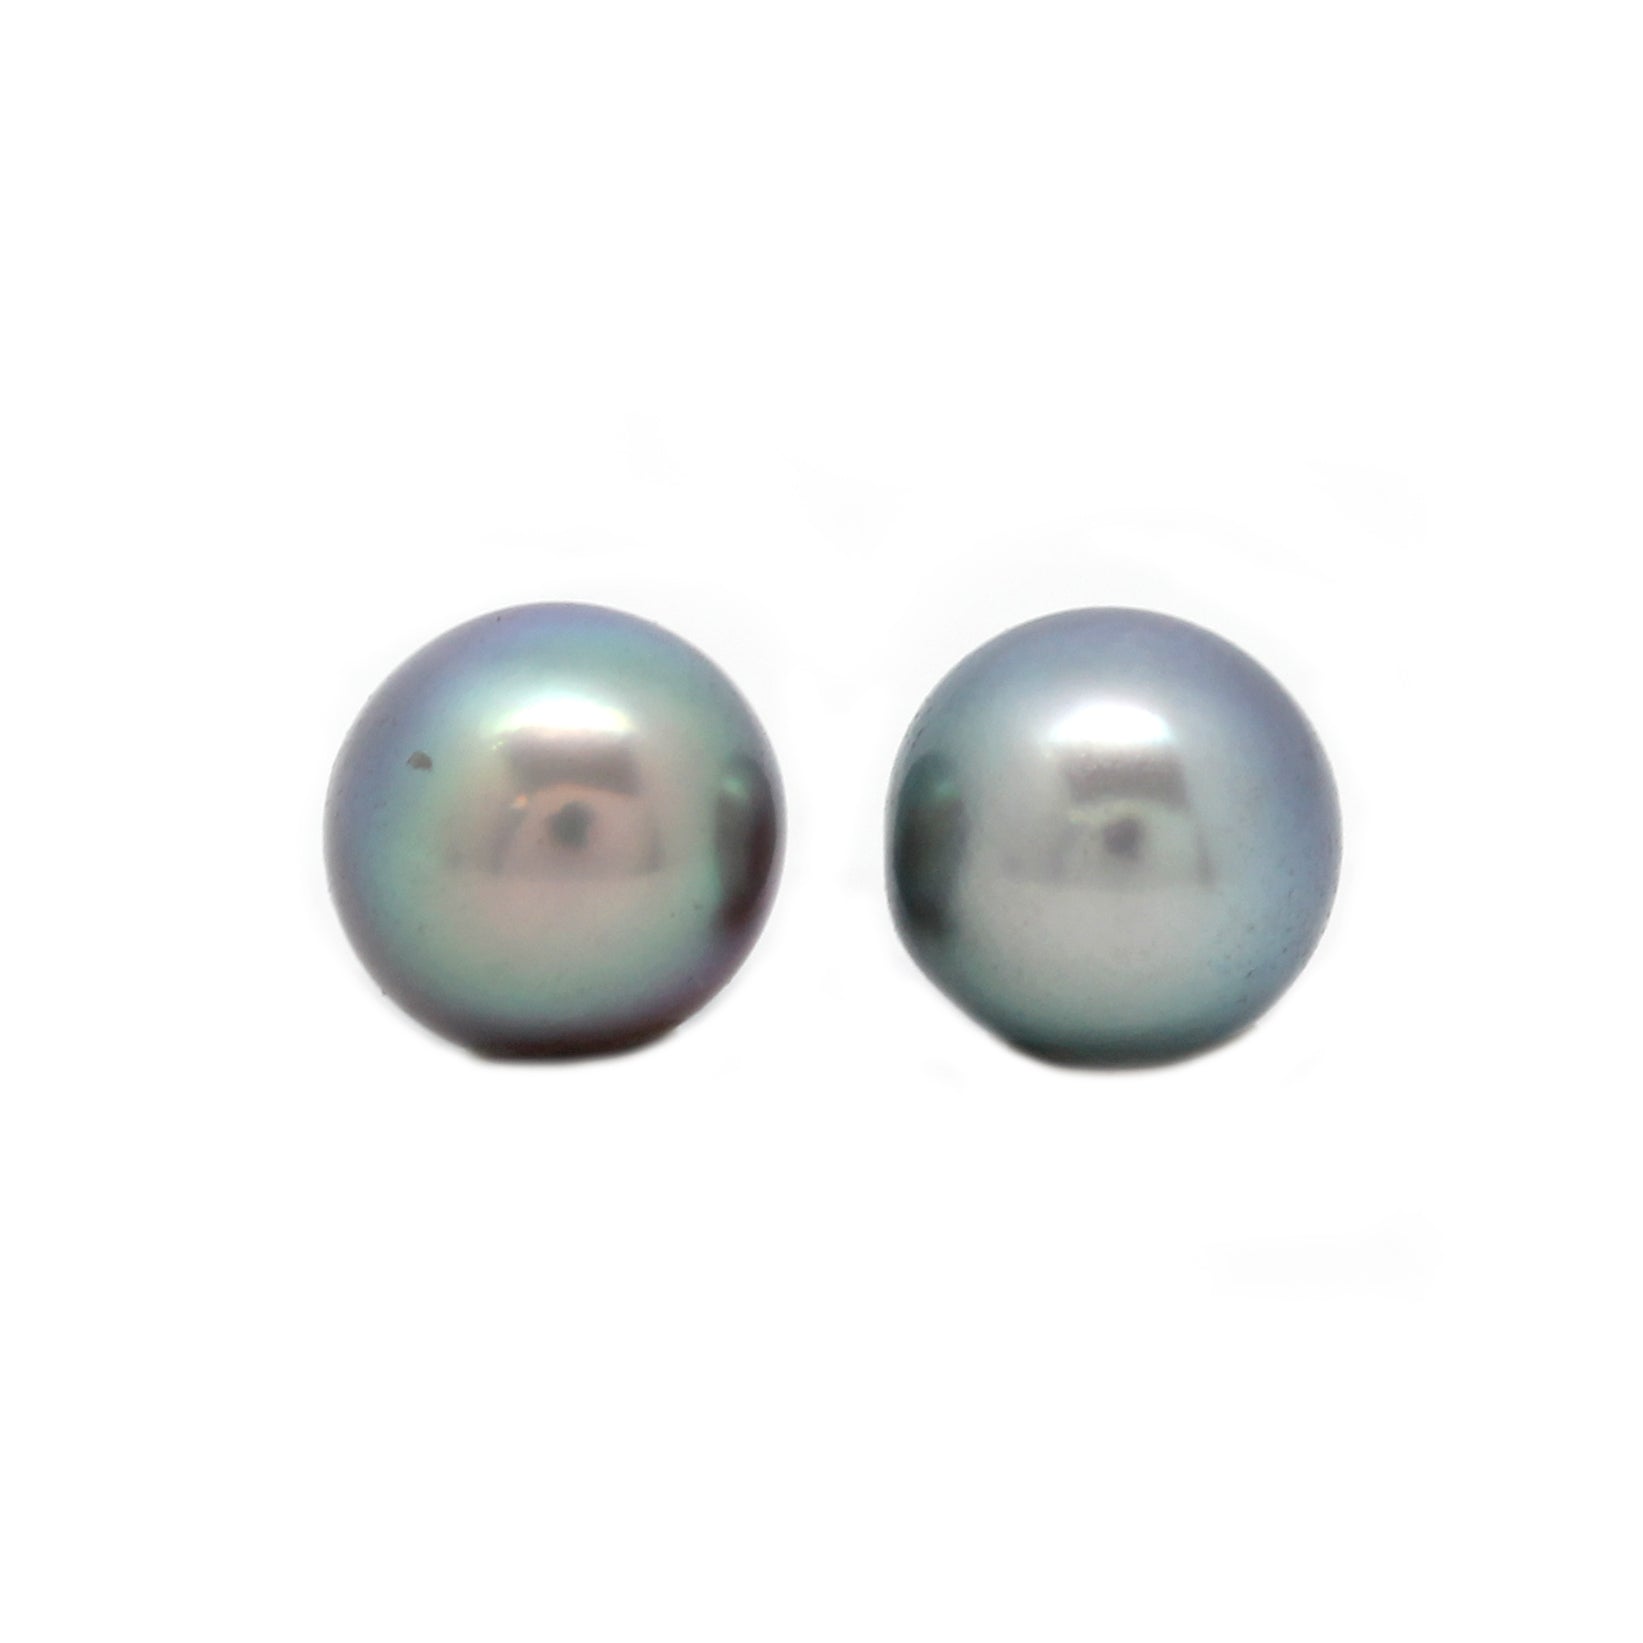 Pair of Loose Pearls from the Sea of Cortez